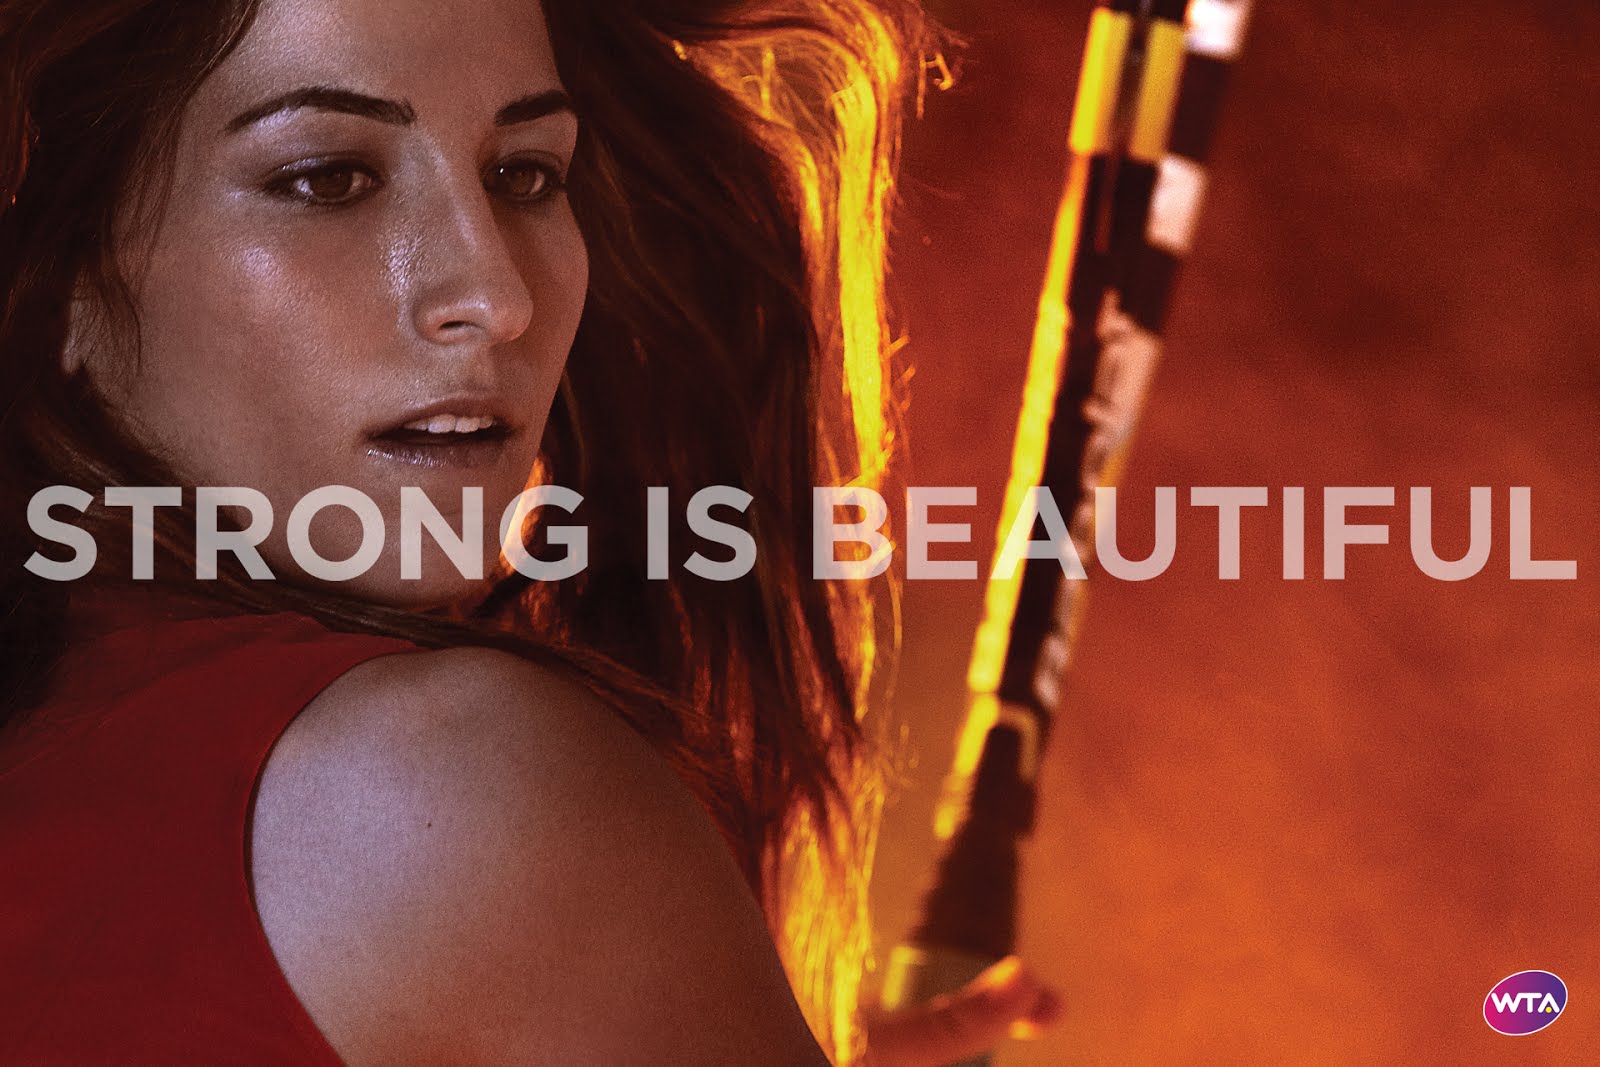 Strong is beautiful. Strong and beautiful.